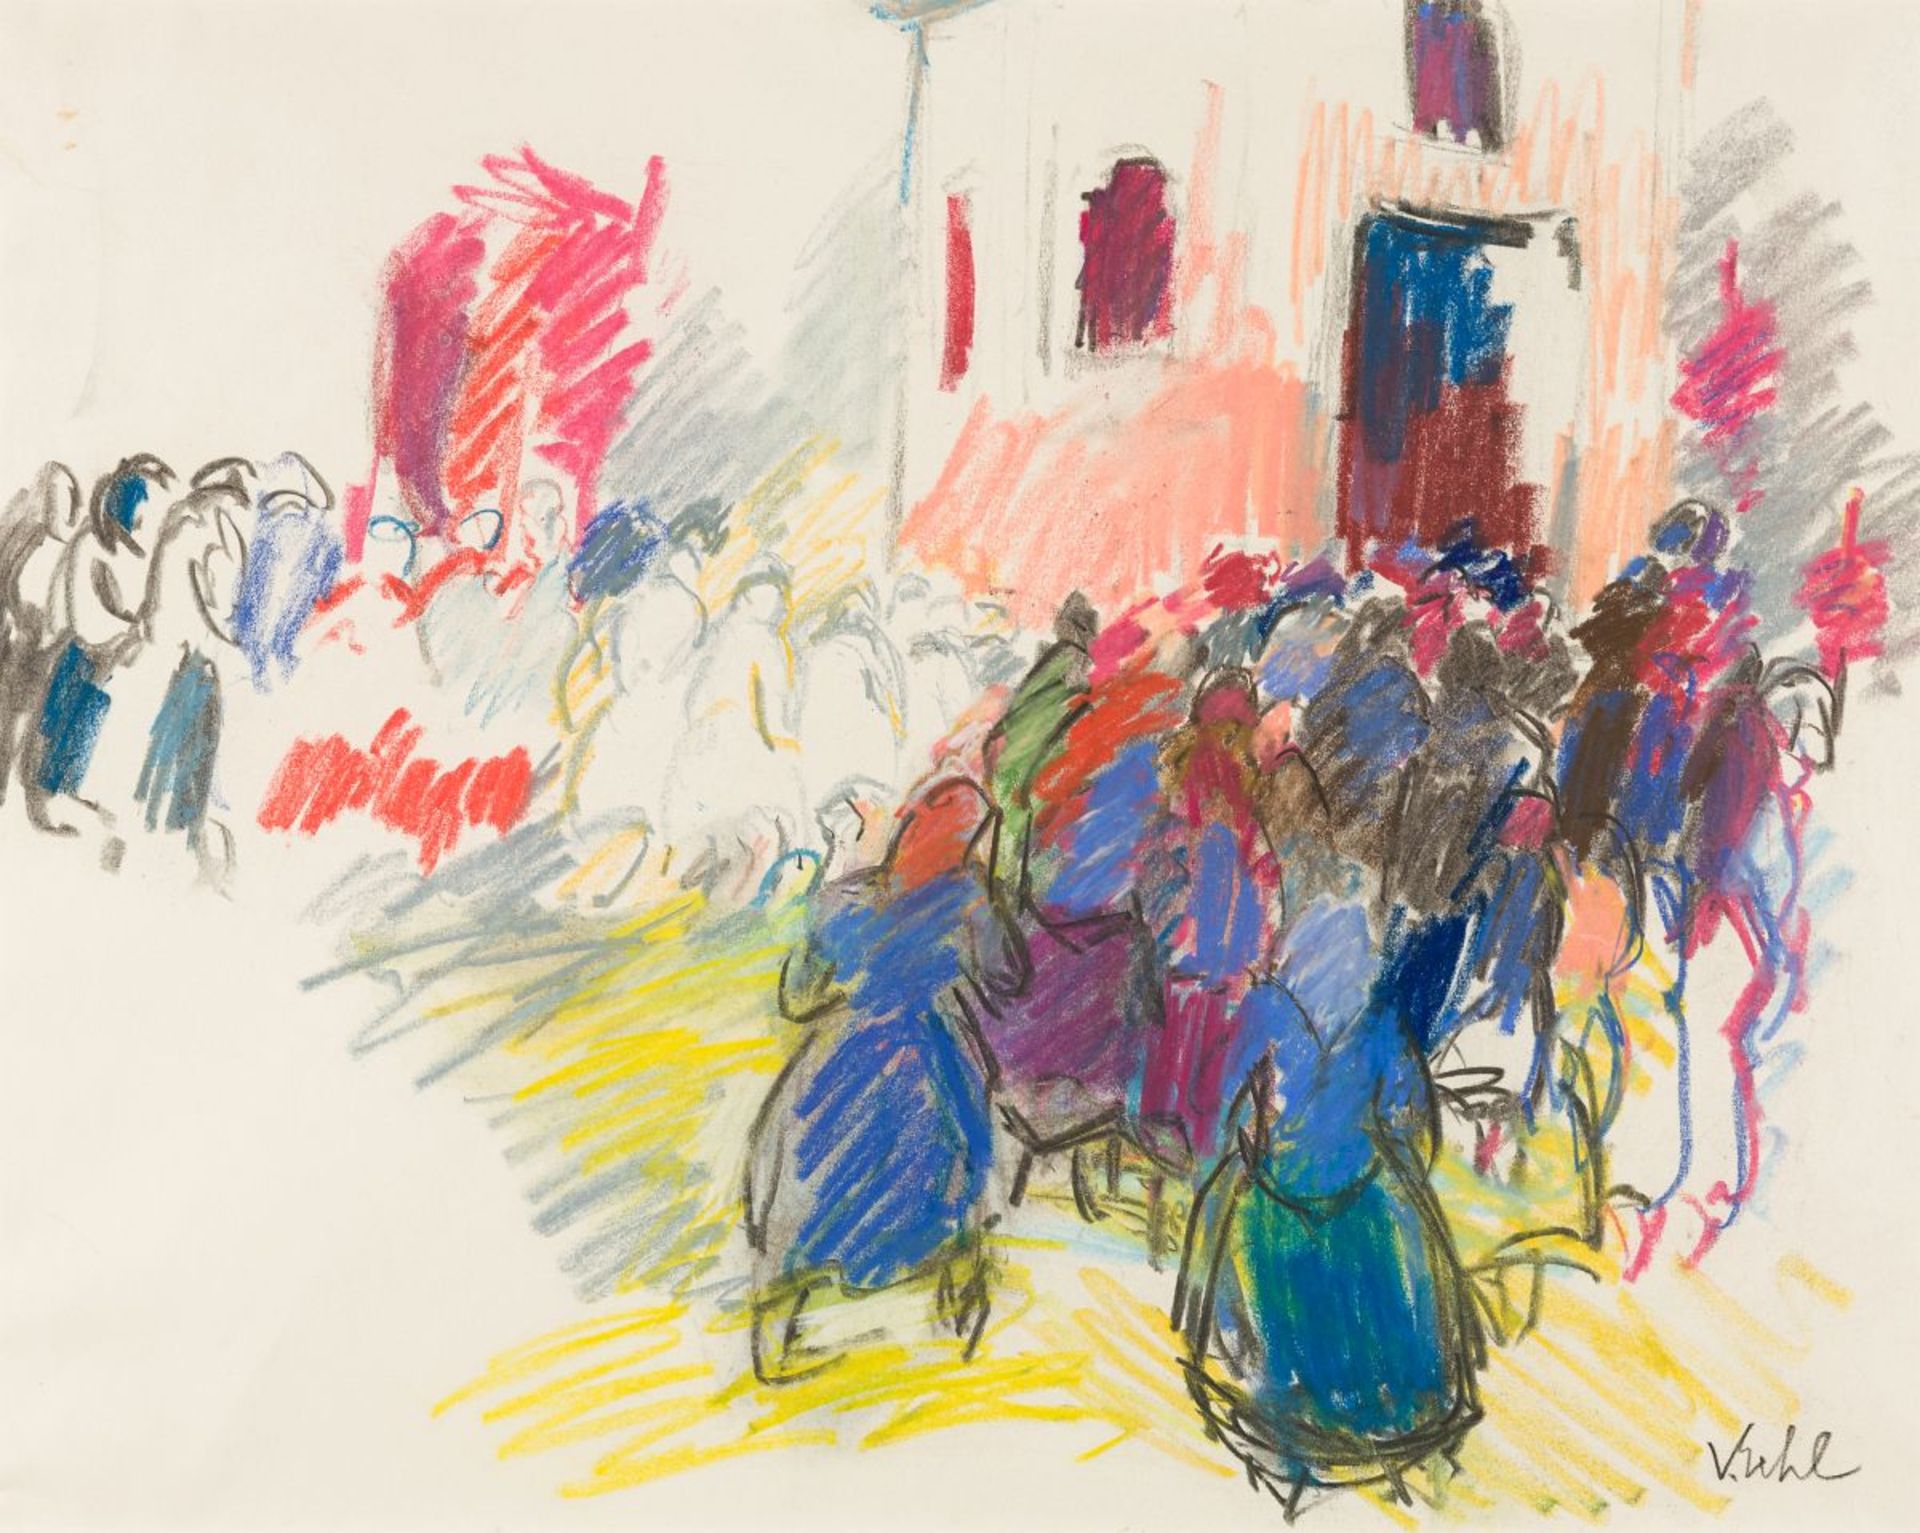 Eckl, Vilma(1892 - 1982)Supplication Procession in Lambachcoloured pastels on papersigned lower